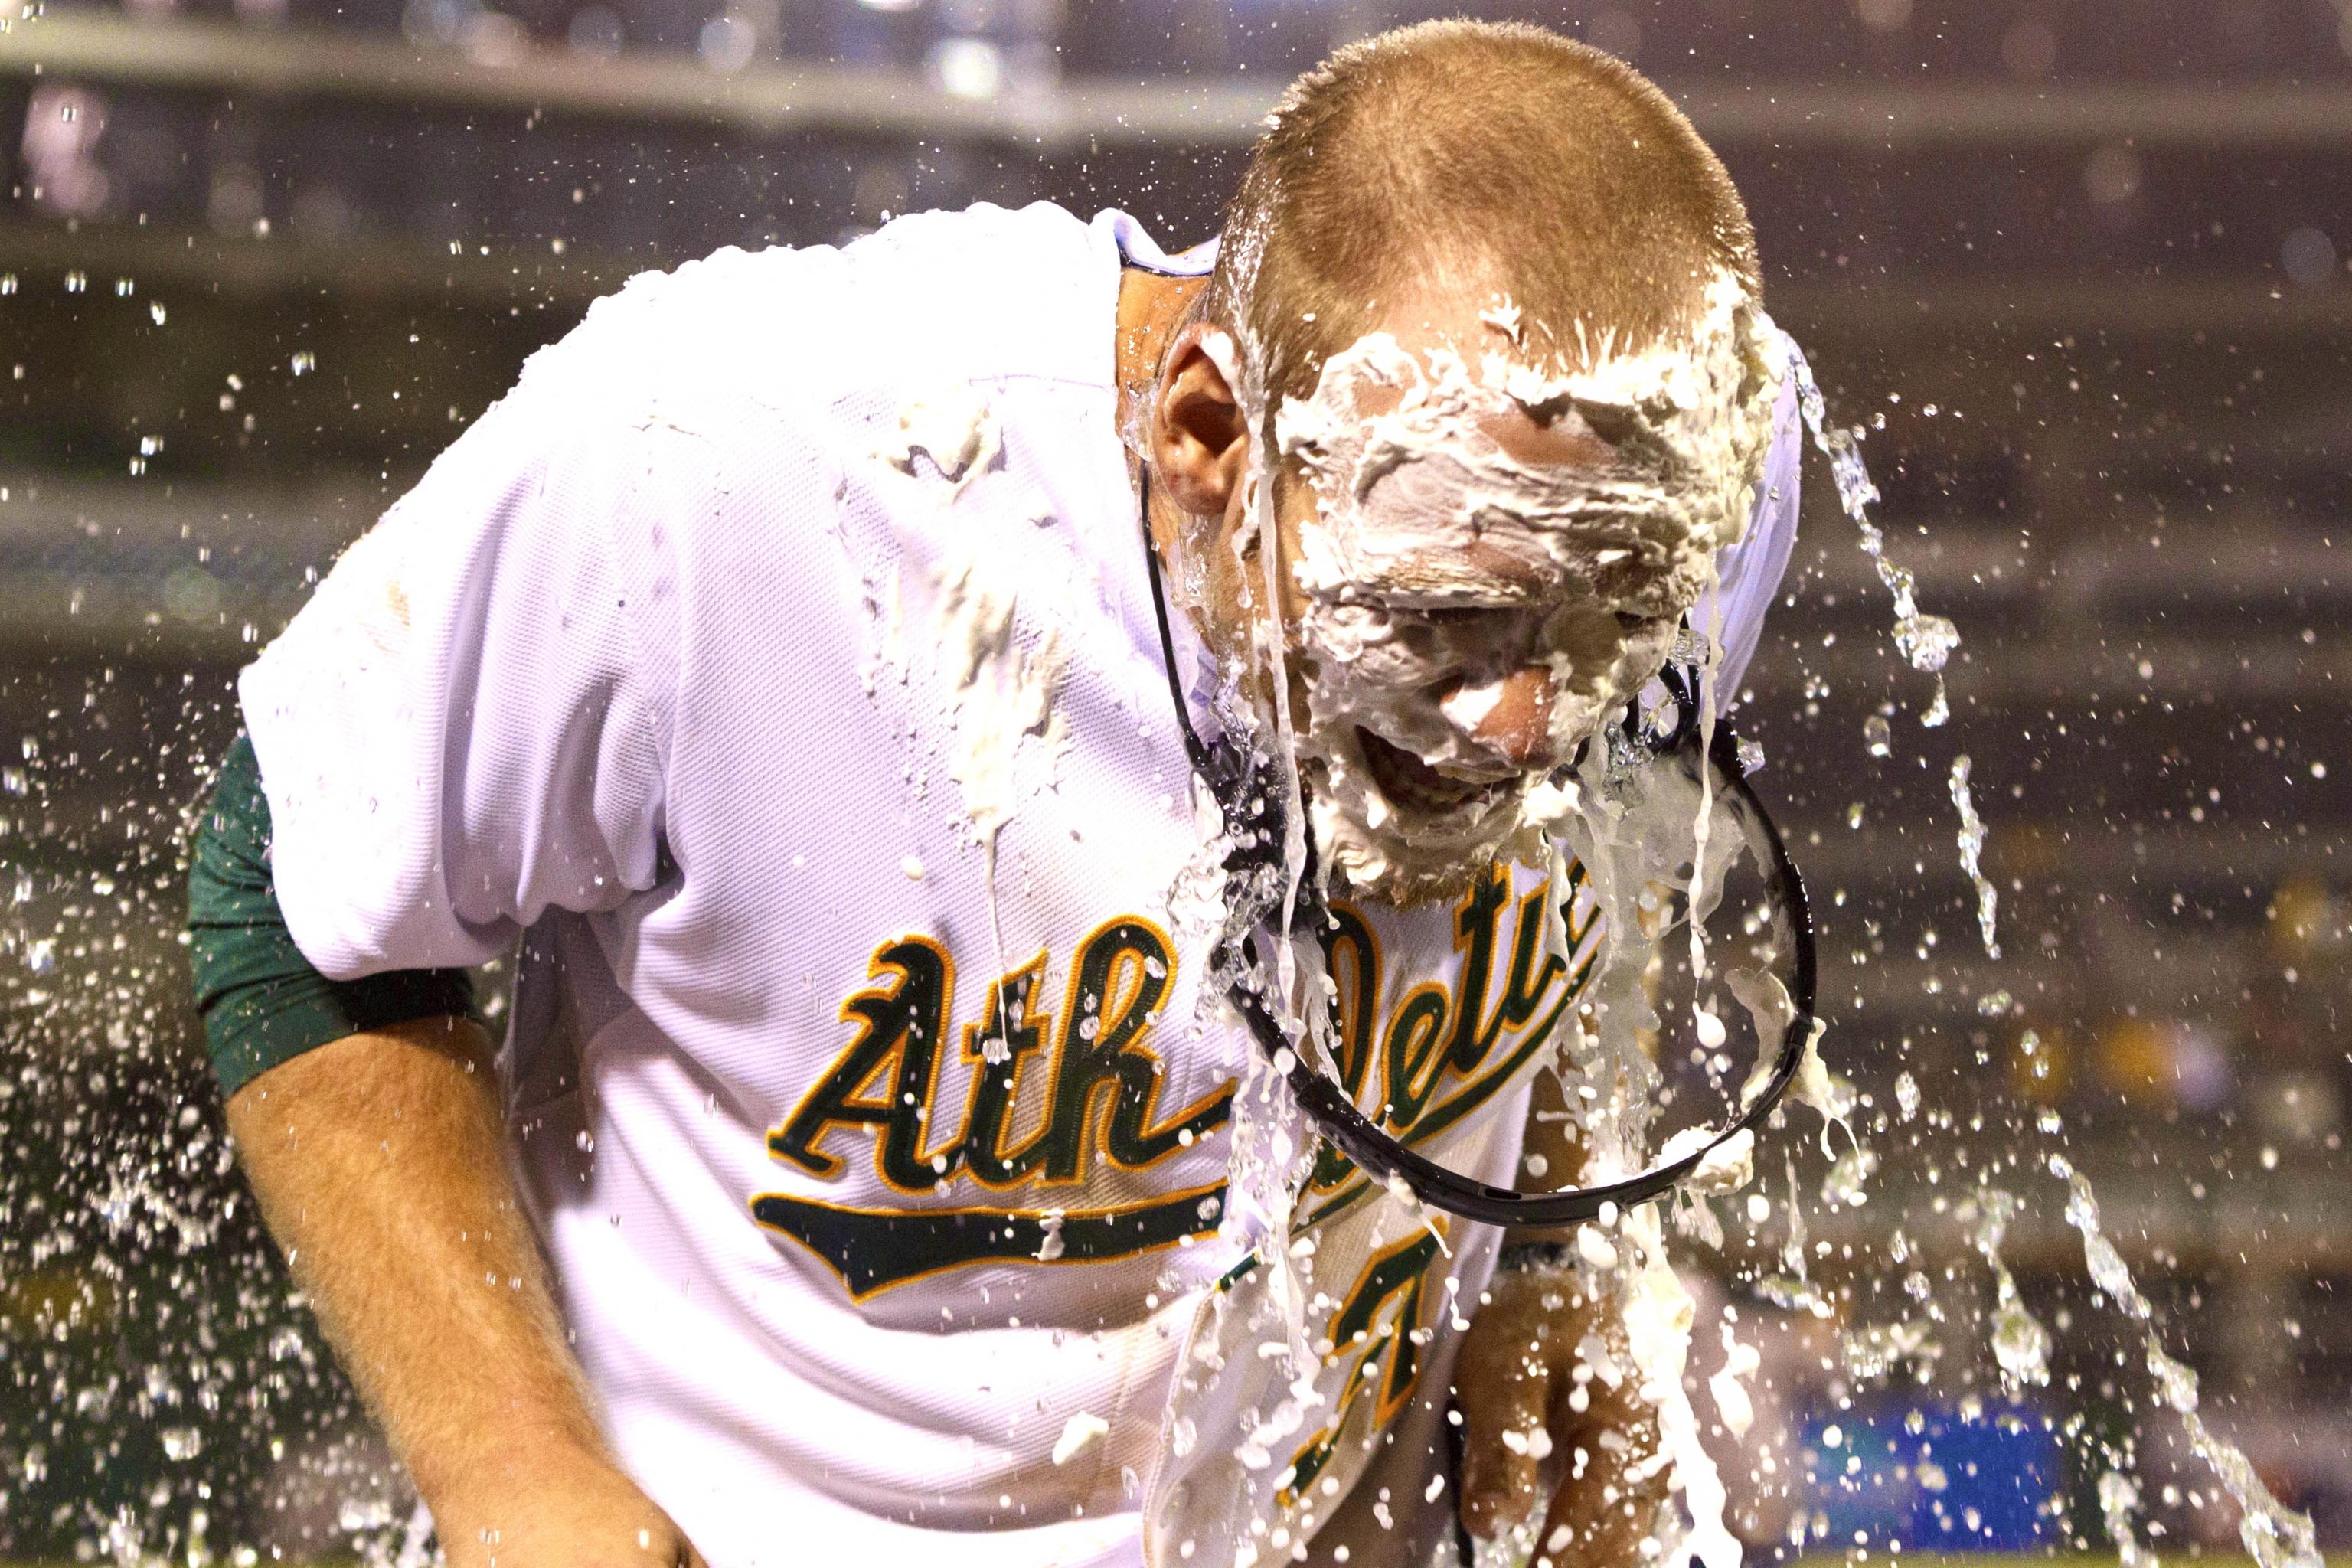 The Death Rattles of the Oakland A's